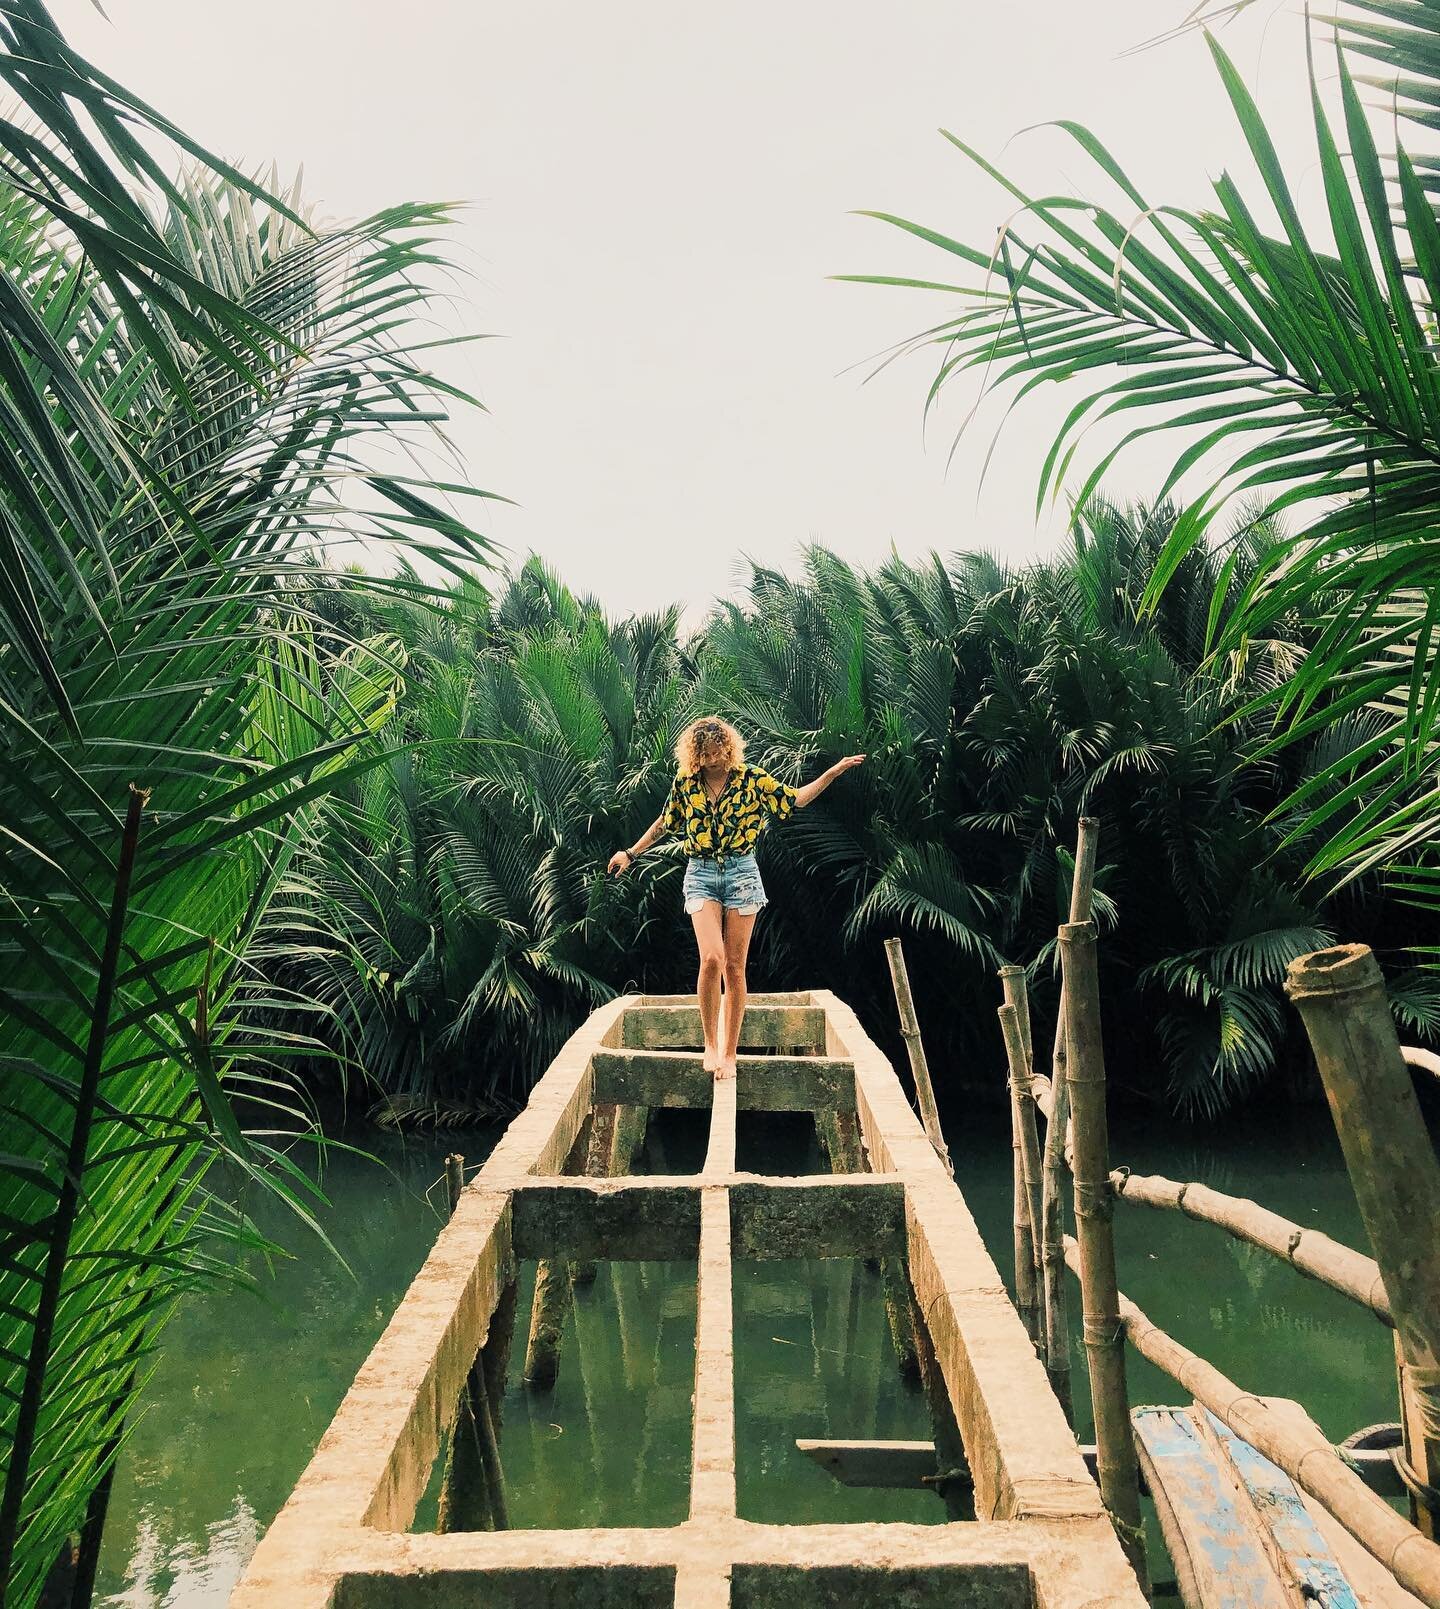 What&rsquo;s life without a little risk?
🚧
🍌
🌴
#stuckinvietnam